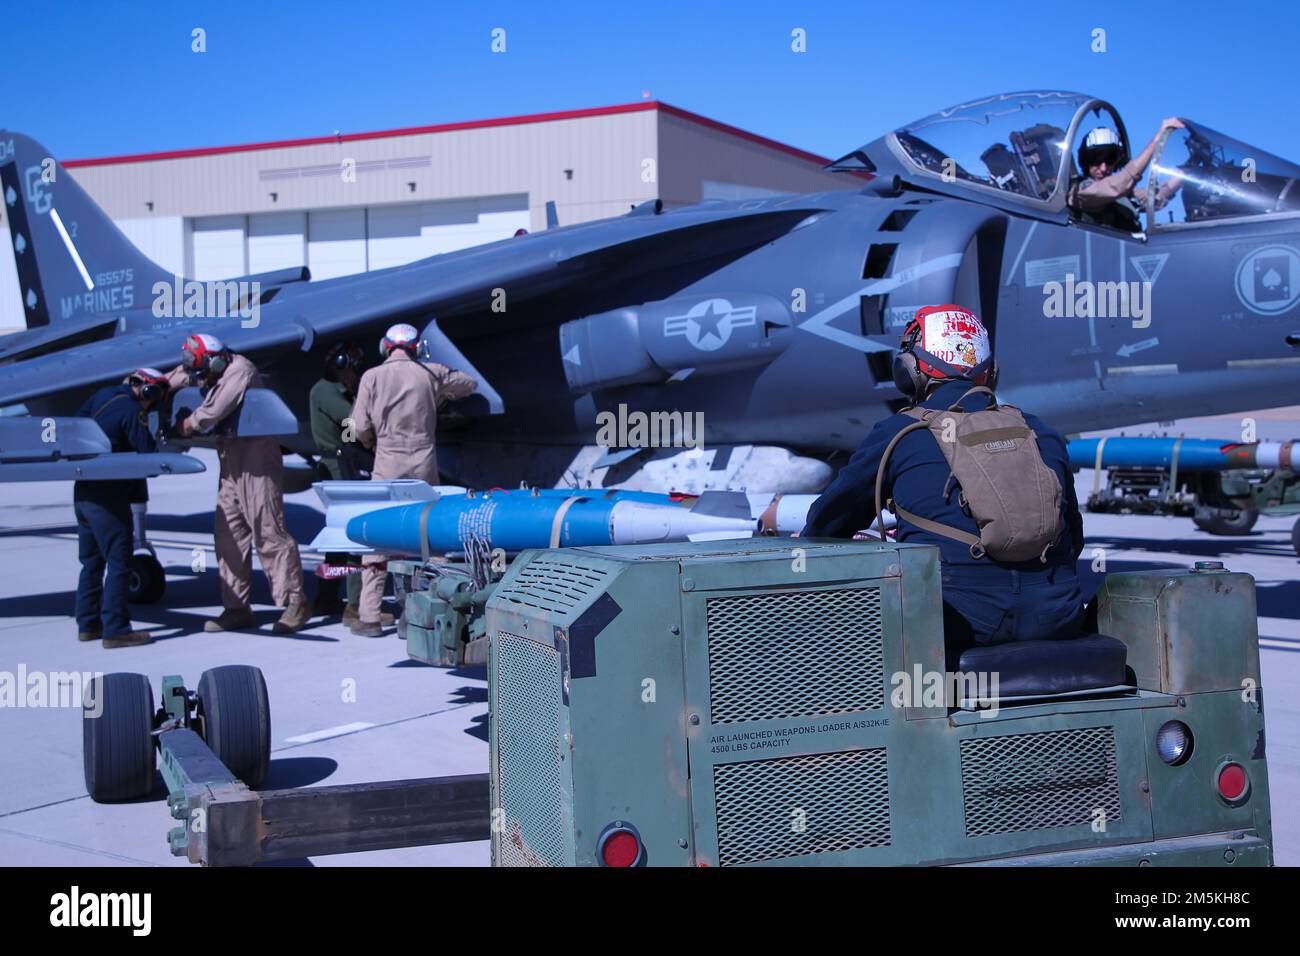 U.S. Marine Corps aviation ordnance technicians, assigned to Marine Aviation Weapons and Tactics Squadron One (MAWTS-1), load ordnance onto an AV-8B Harrier II, during Weapons and Tactics Instructor (WTI) course 2-22, at Marine Corps Air Station Yuma, Arizona, March 22, 2022. WTI is a seven-week training event hosted by MAWTS-1, providing standardized advanced tactical training and certification of unit instructor qualifications to support Marine Aviation training and readiness, and assists in developing and employing aviation weapons and tactics. Stock Photo